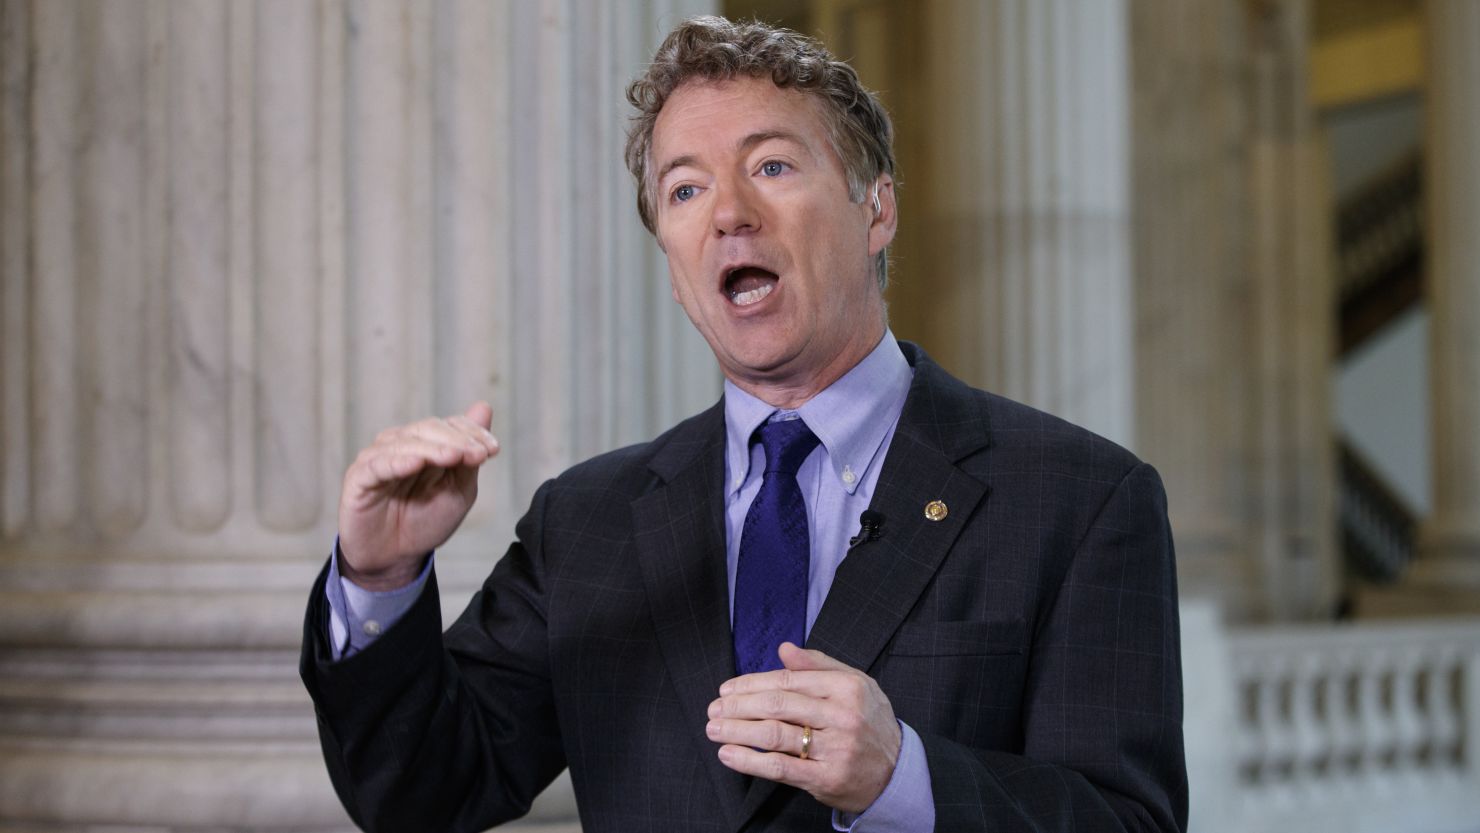 Sen. Rand Paul, R-Ky., criticizes the House Republican healthcare reform plan as "Obamacare light" during a television interview on Capitol Hill in Washington, Tuesday, March 7, 2017. (AP Photo/J. Scott Applewhite)